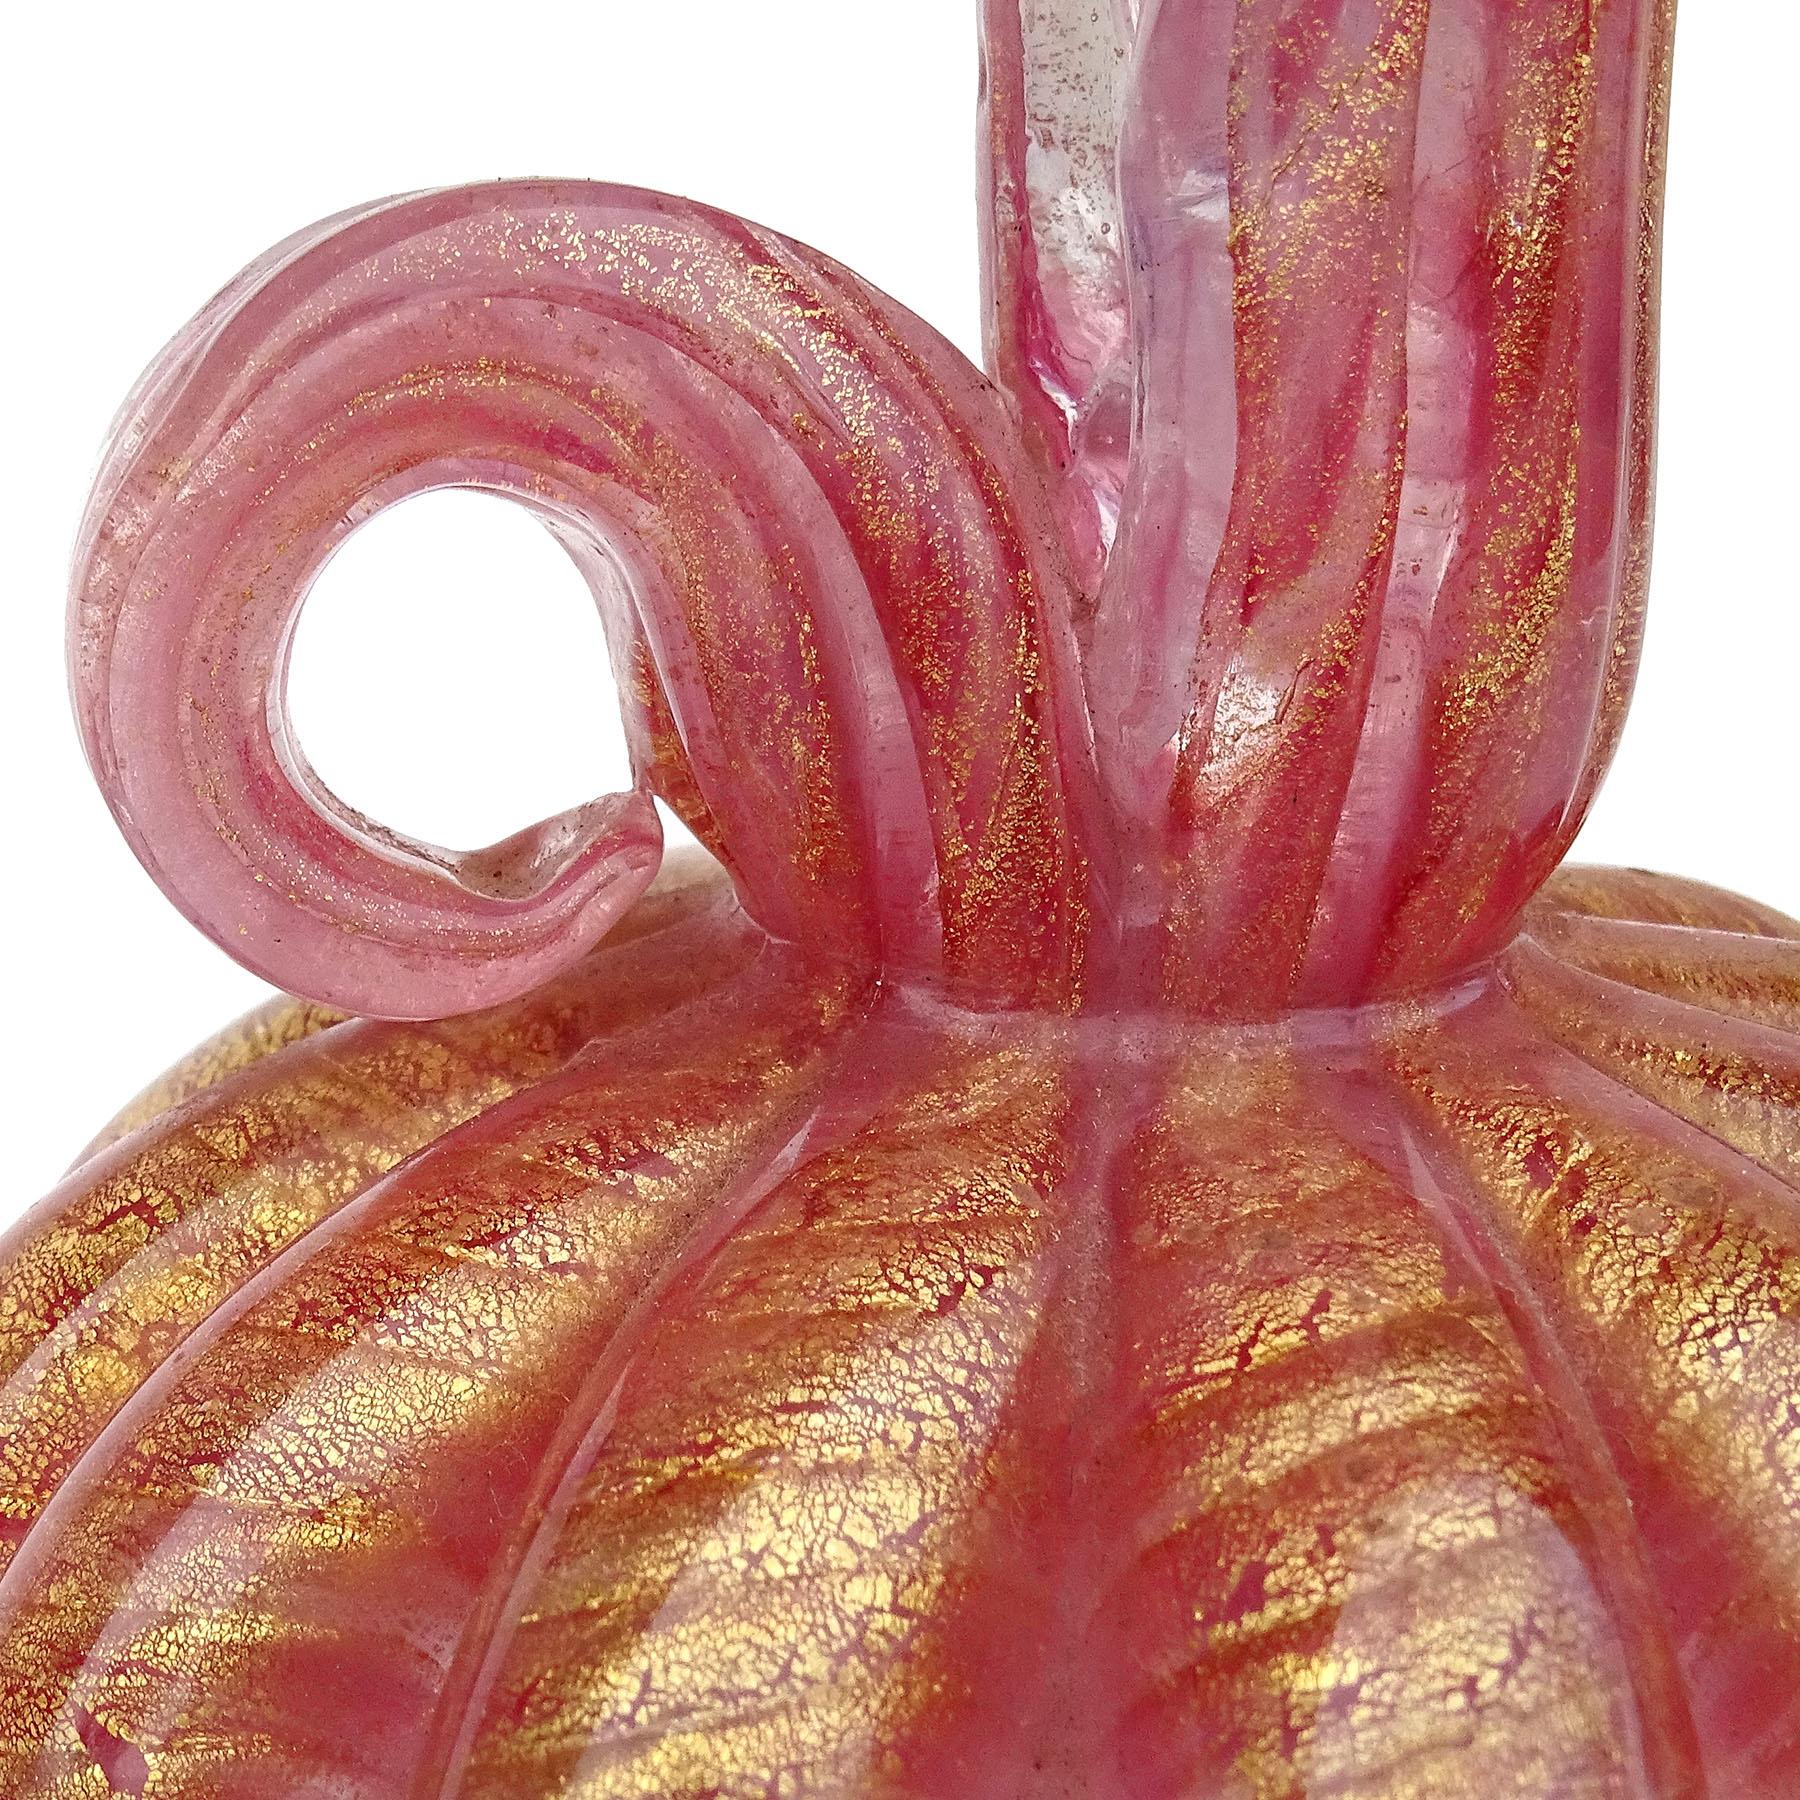 Hand-Crafted Barovier Toso Murano Pink Gold Flecks Italian Art Glass Ribbed Pitcher Vase